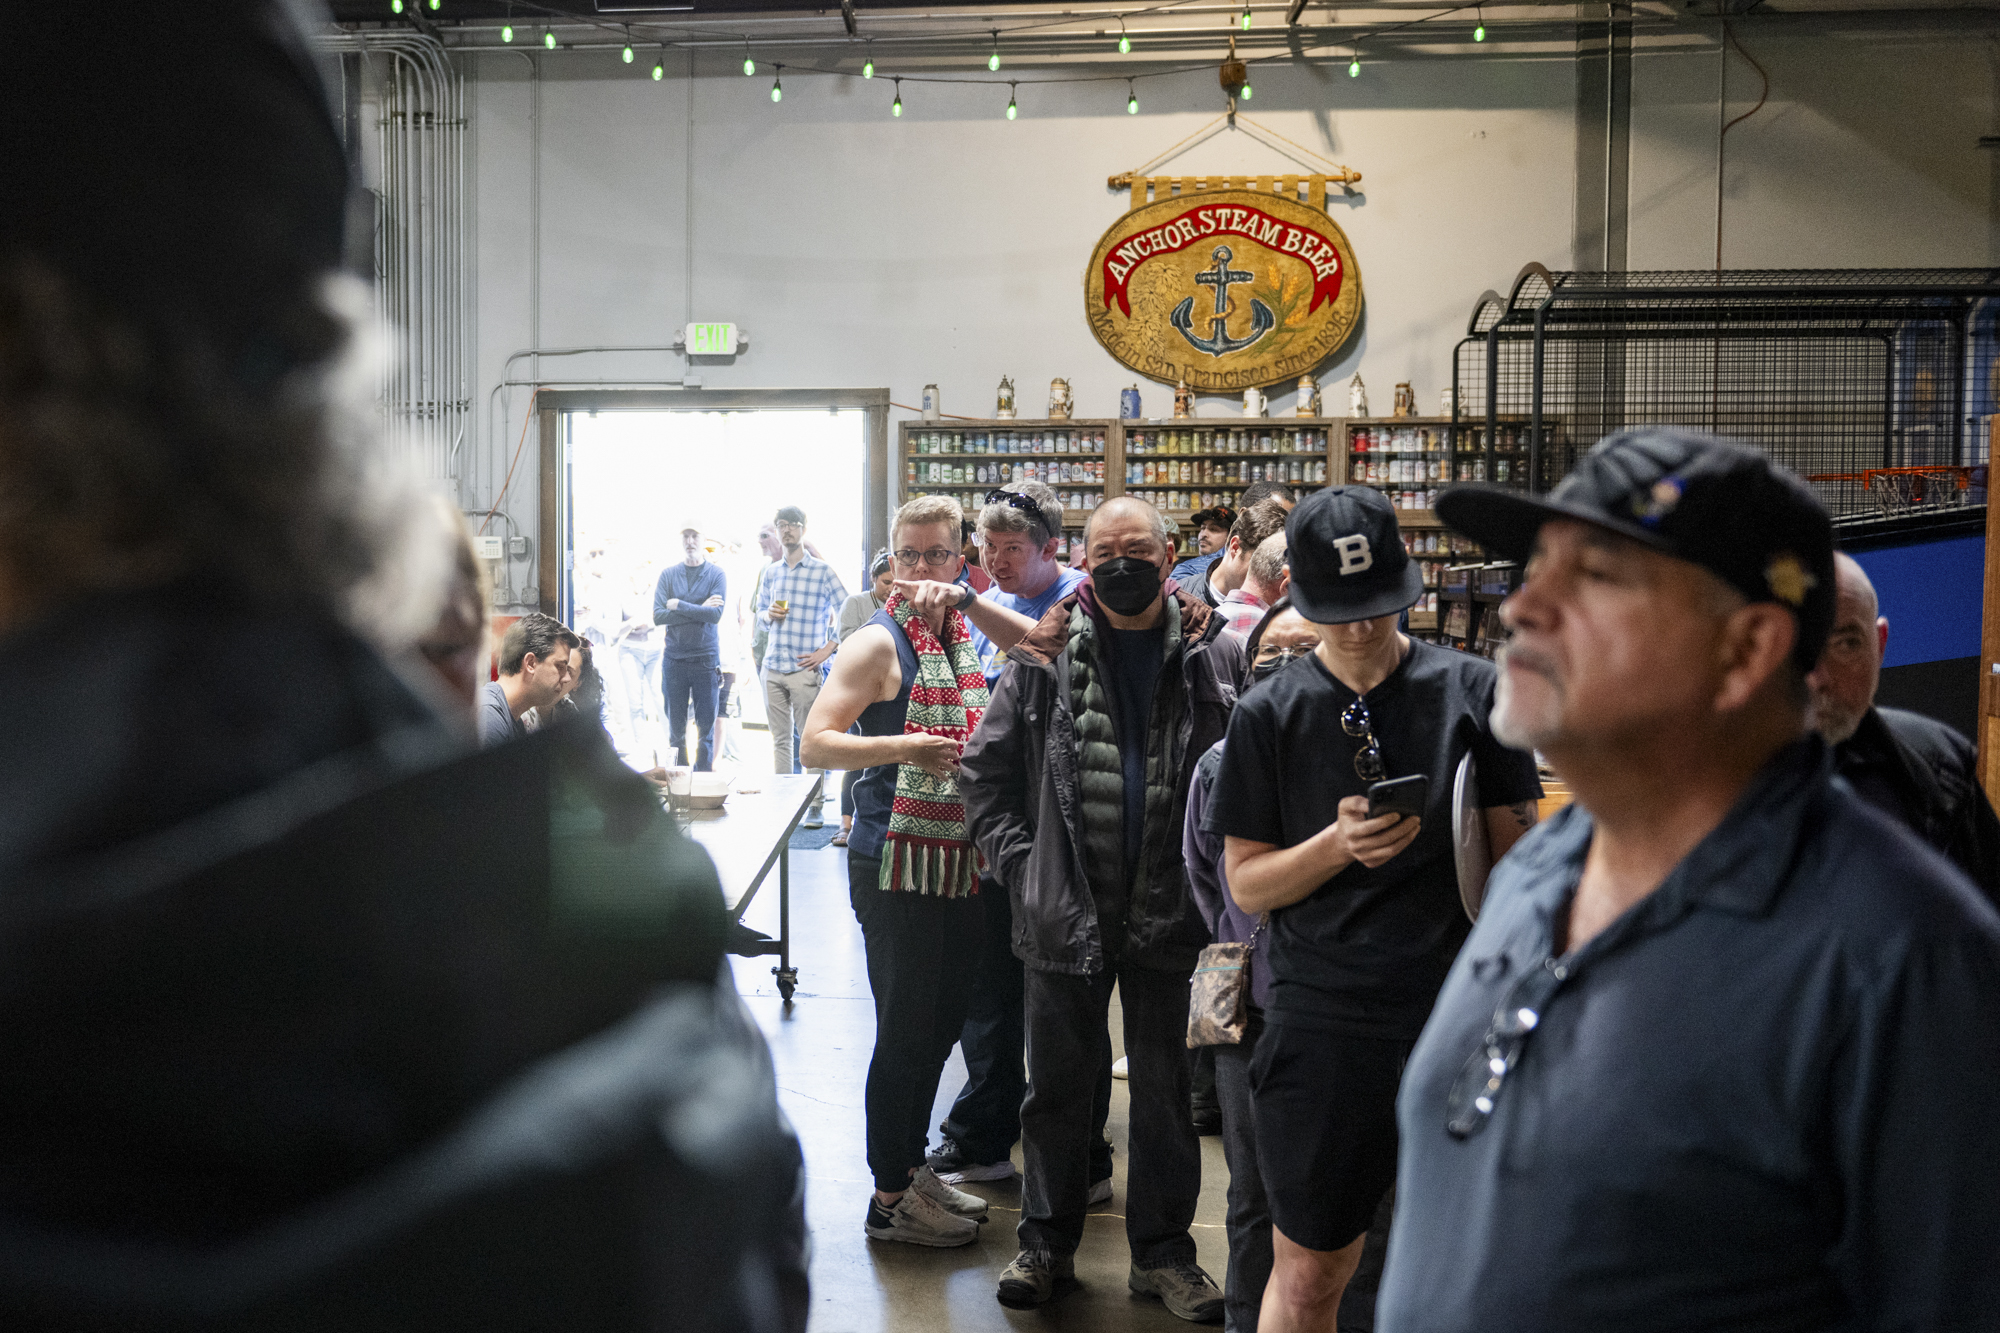 People stand in a line inside a large indoor space with a banner on the wall reading "Anchor Steam Beer."